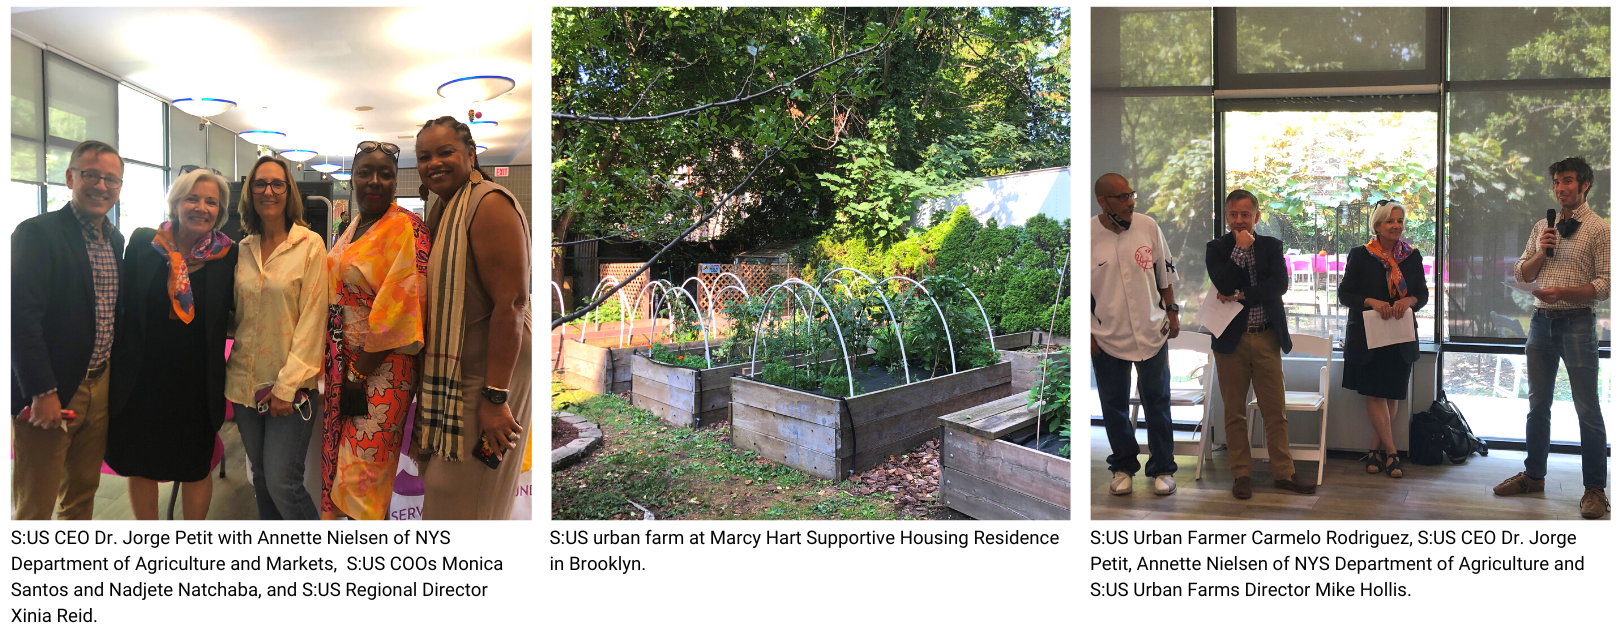 Harvest Luncheon Showcases Urban Farms & Farmers  Who Overcame Homelessness & Mental Health Challenges